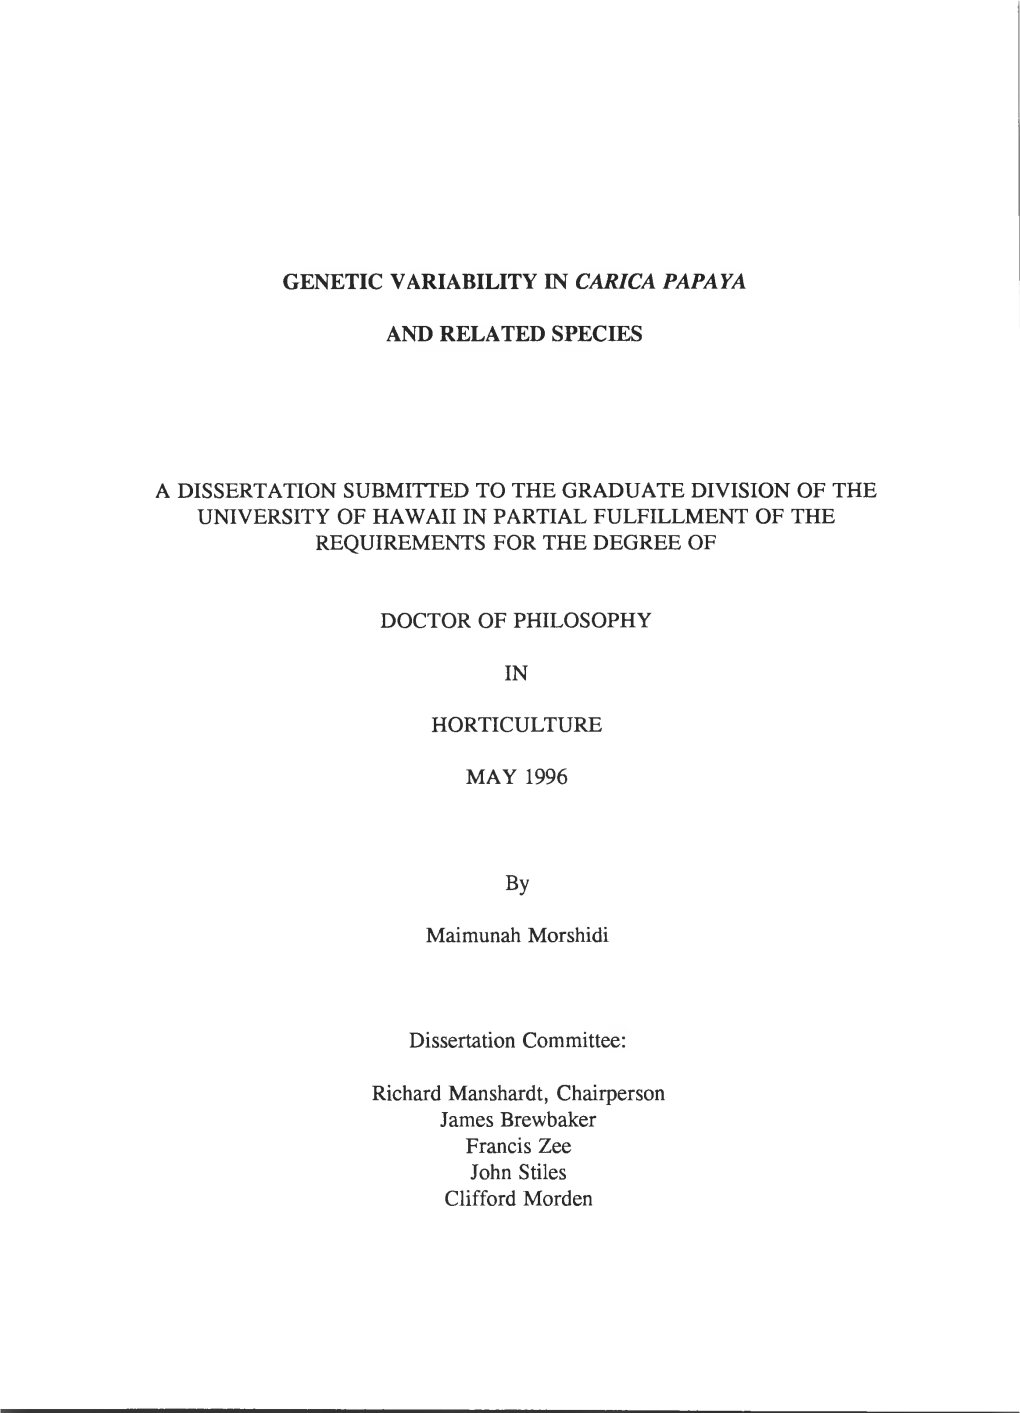 Genetic Variability in Carica Papaya and Related Species a Dissertation Submitted to the Graduate Division of the University Of